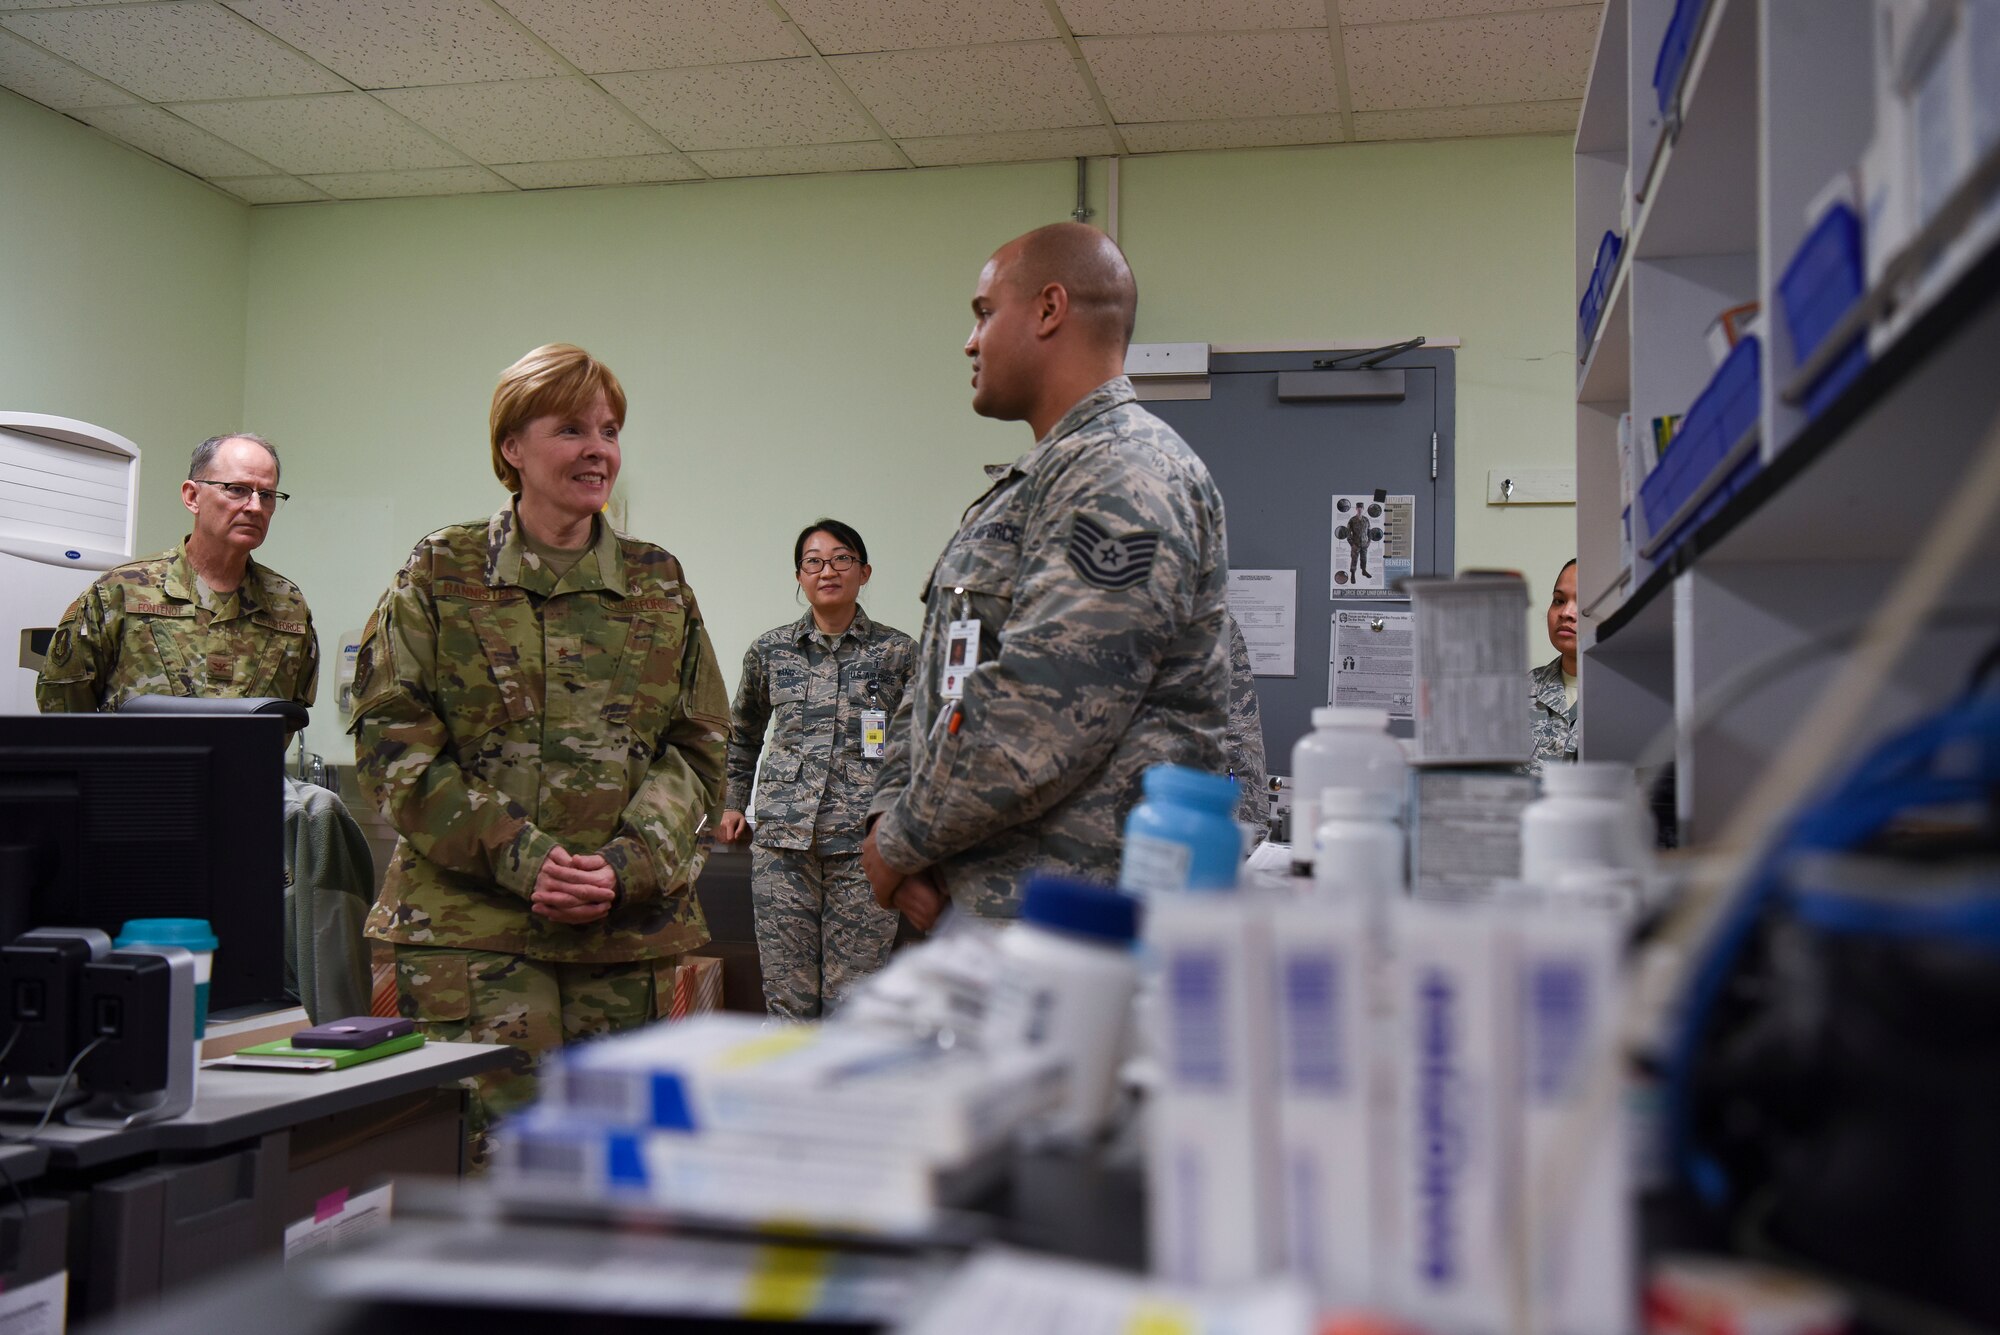 U.S. Air Force Tech. Sgt. Defabian Johnson, 8th Medical Group pharmacy services noncommissioned officer in charge, briefs Brig. Gen. (Dr.) Sharon Bannister, Defense Health Agency education and training deputy assistant director and Assistant Surgeon General for Dental Services, during her visit to Kunsan Air Base, Republic of Korea, Jan. 23, 2019. The Air Force Dental Service mission is to provide innovative, expeditionary Airmen to support global operations and ensure a dentally fit force through Trusted Care, and its readiness contributions are critical to Total Force Full Spectrum Readiness. (U.S. Air Force Photo by Senior Airman Savannah Waters)